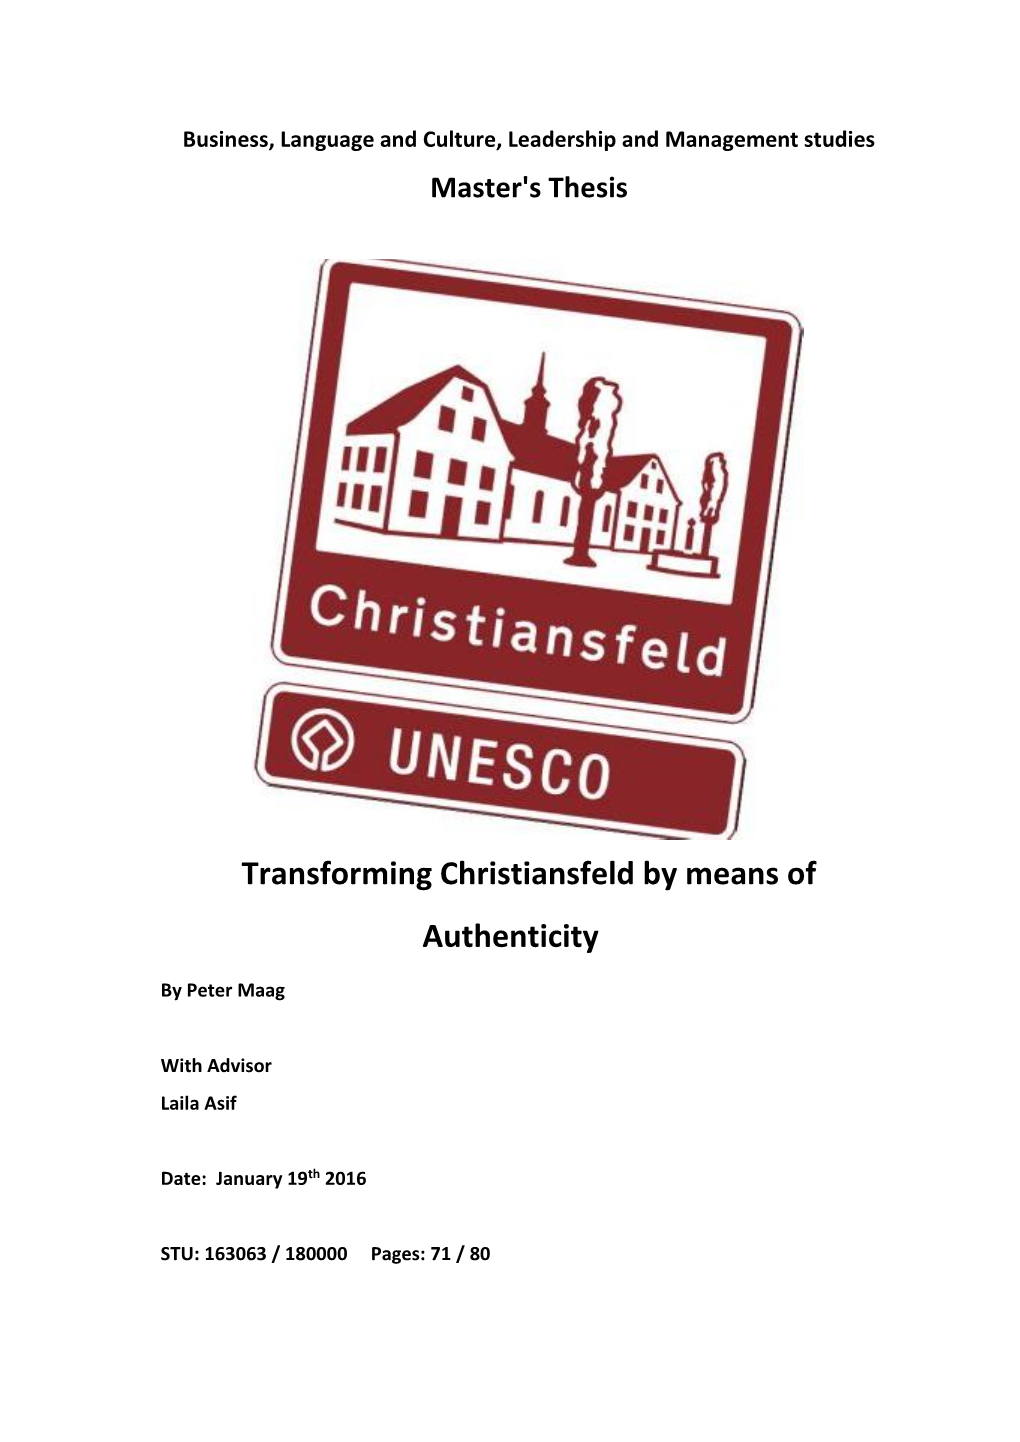 Transforming Christiansfeld by Means of Authenticity